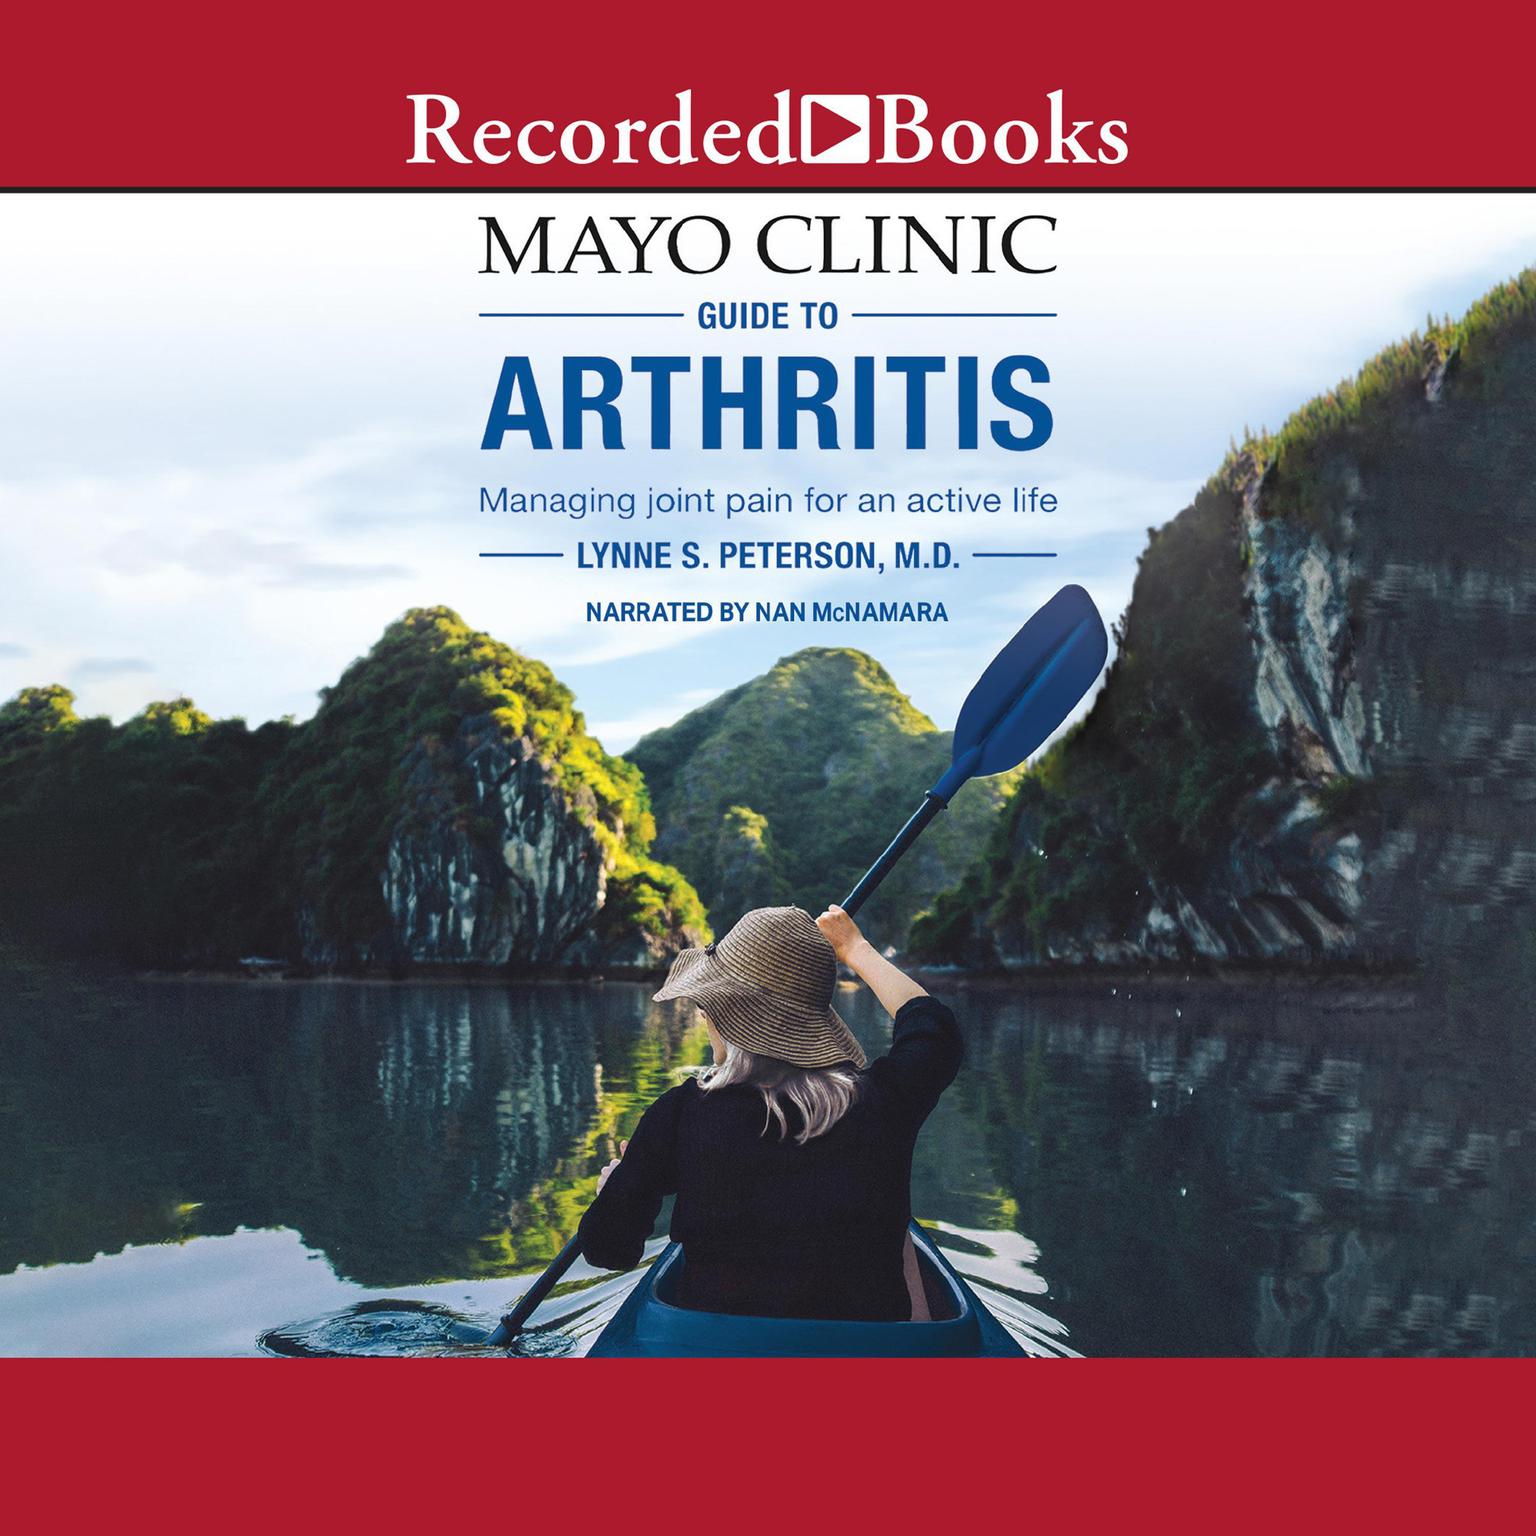 Mayo Clinic Guide to Arthritis: Managing Joint Pain for an Active Life Audiobook, by Lynne S. Petersen